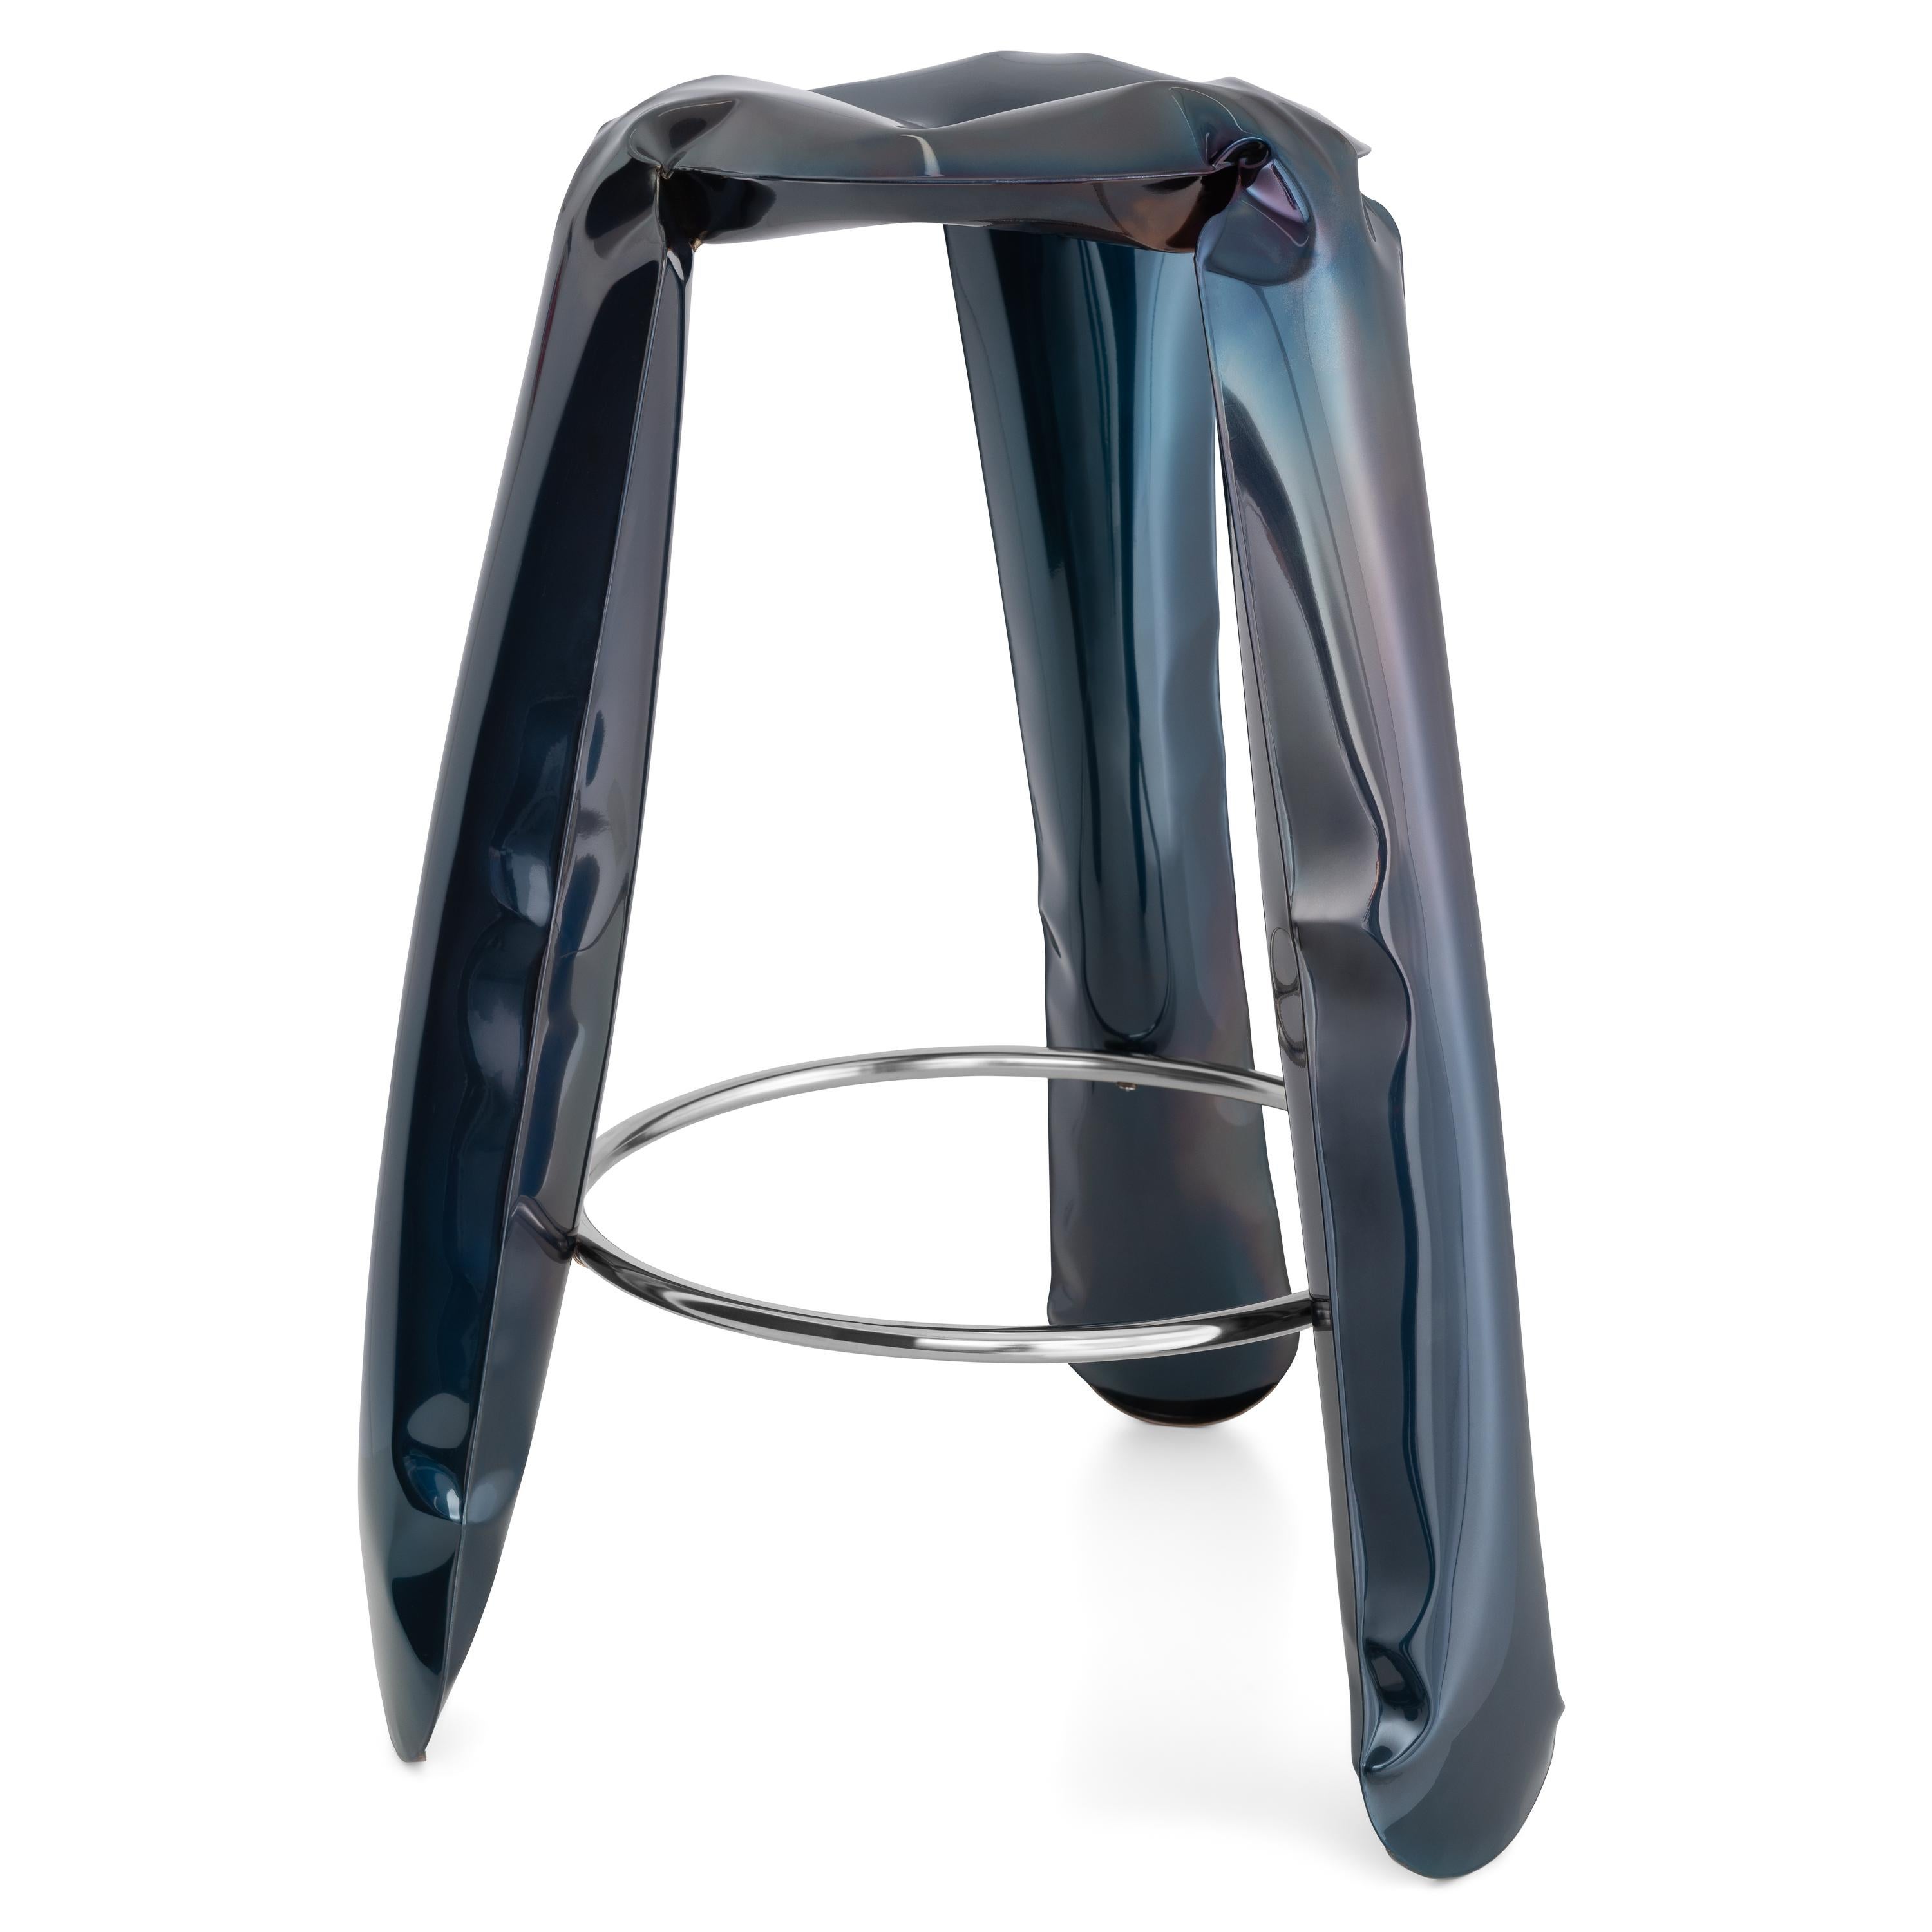 Cosmic Blue Steel Bar Plopp stool by Zieta
Dimensions: D 35 x H 75 cm 
Material: Stainless steel, carbon steel. 
Finish: Thermal colored.
Available in colors: Beige, black, white, blue, graphite, moss, umbra gray, flaming gold, and cosmic blue.